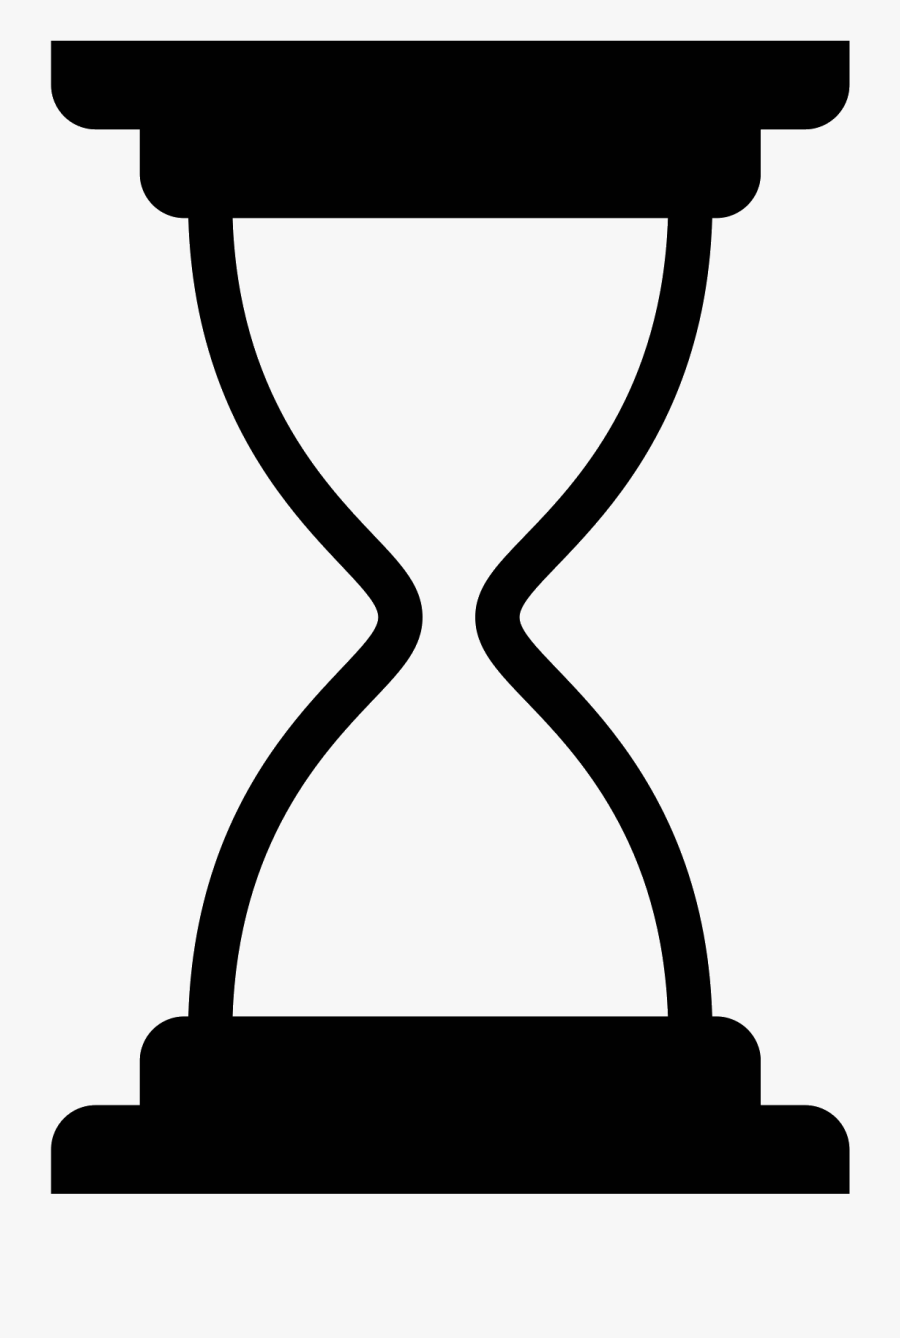 Hourglass Clipart Sand Timer - Sand Clock Icon Png, Transparent Clipart